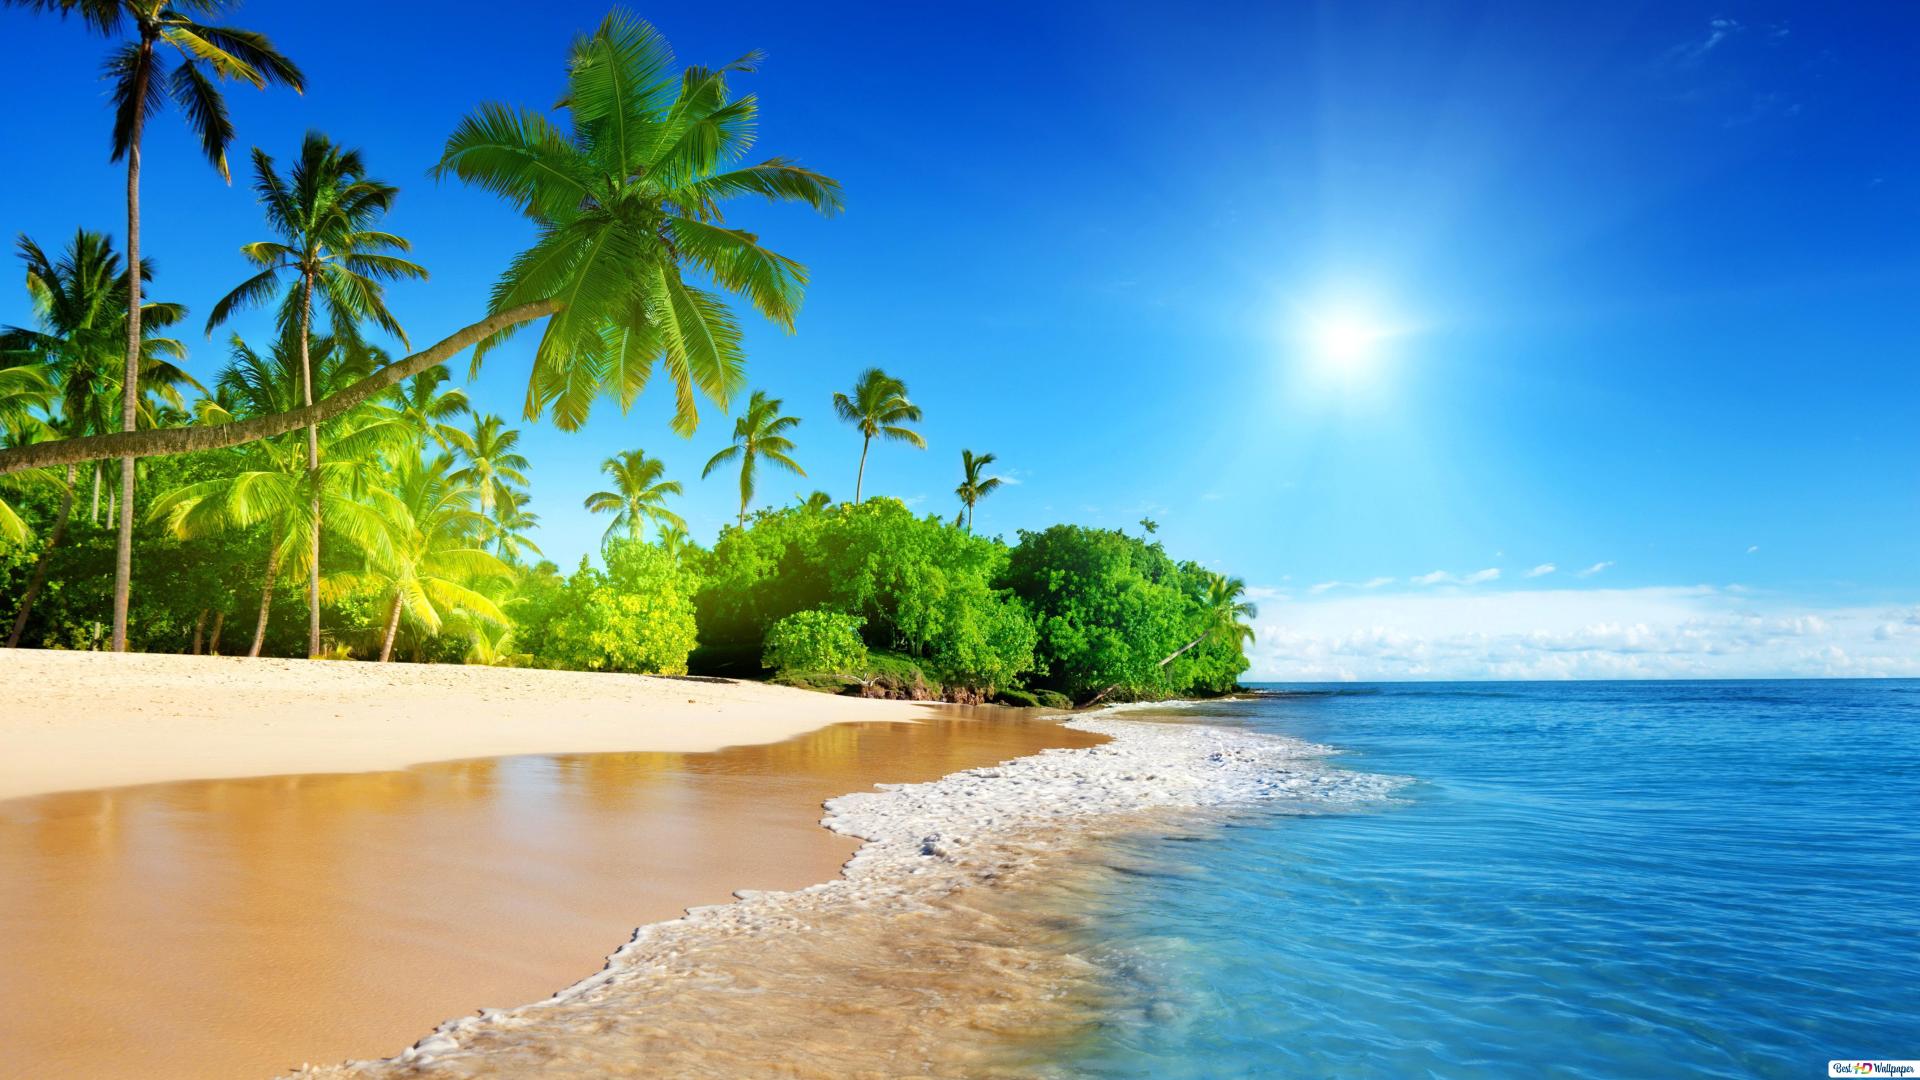 Colorful beach view HD wallpaper download